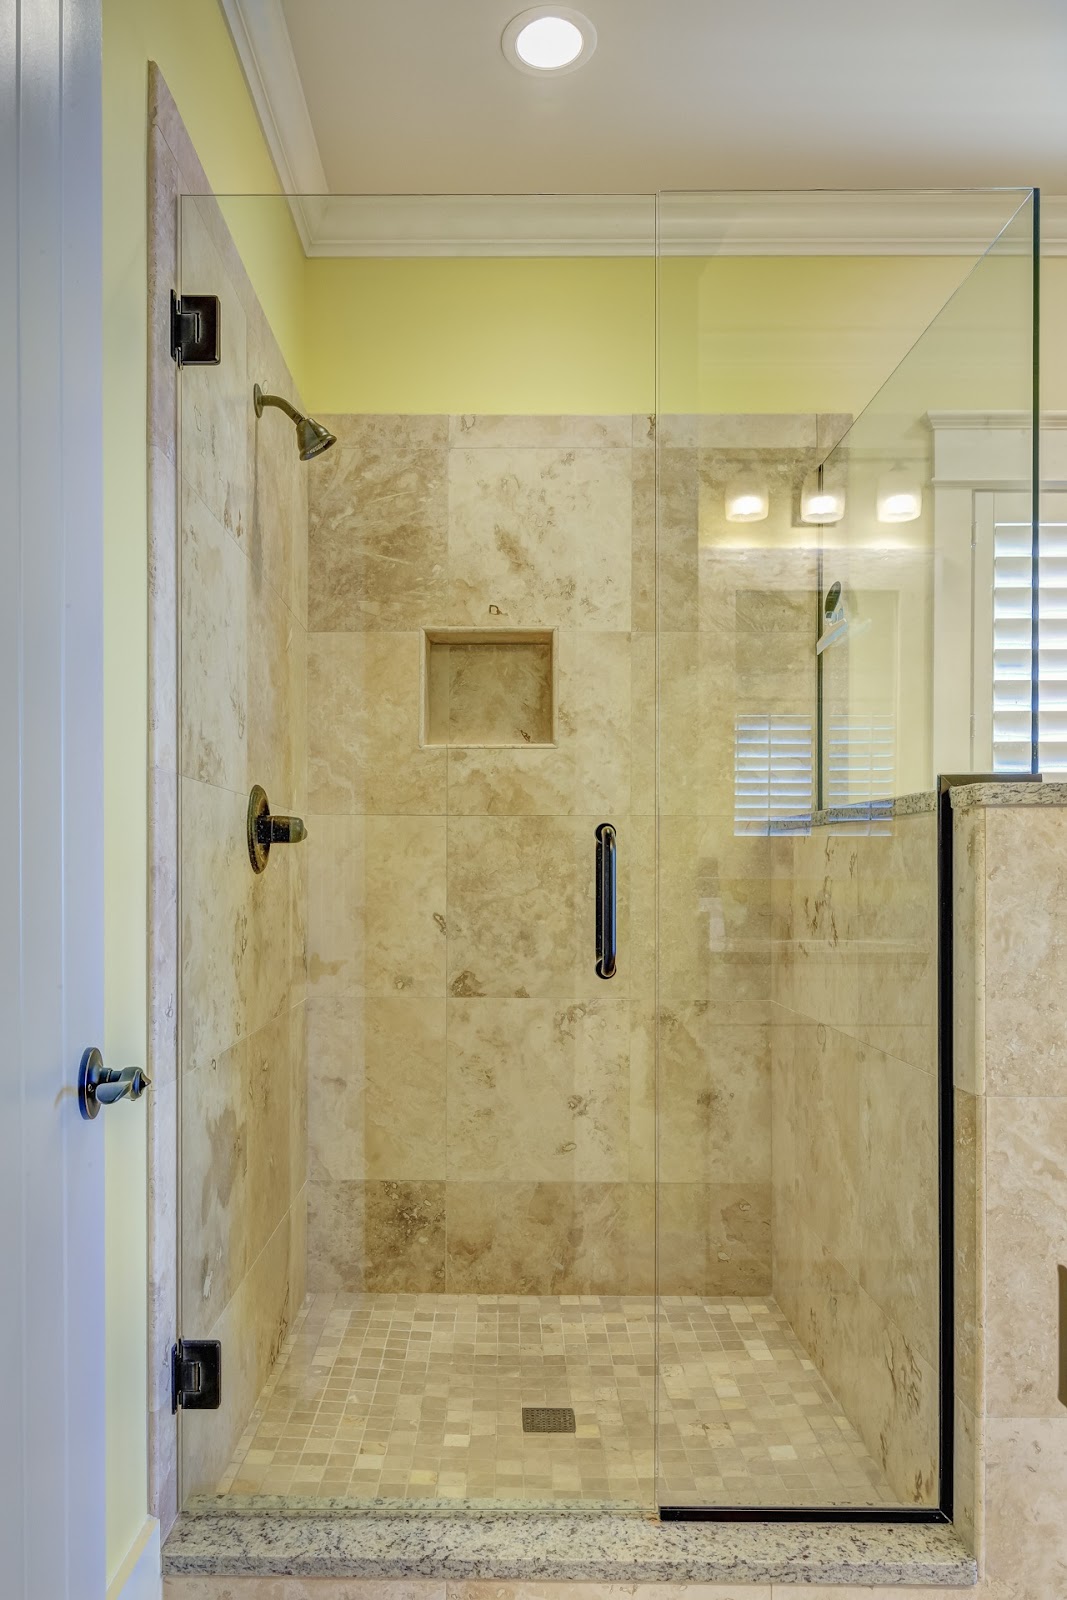 In the future, shower glass doors will replace shower curtains.